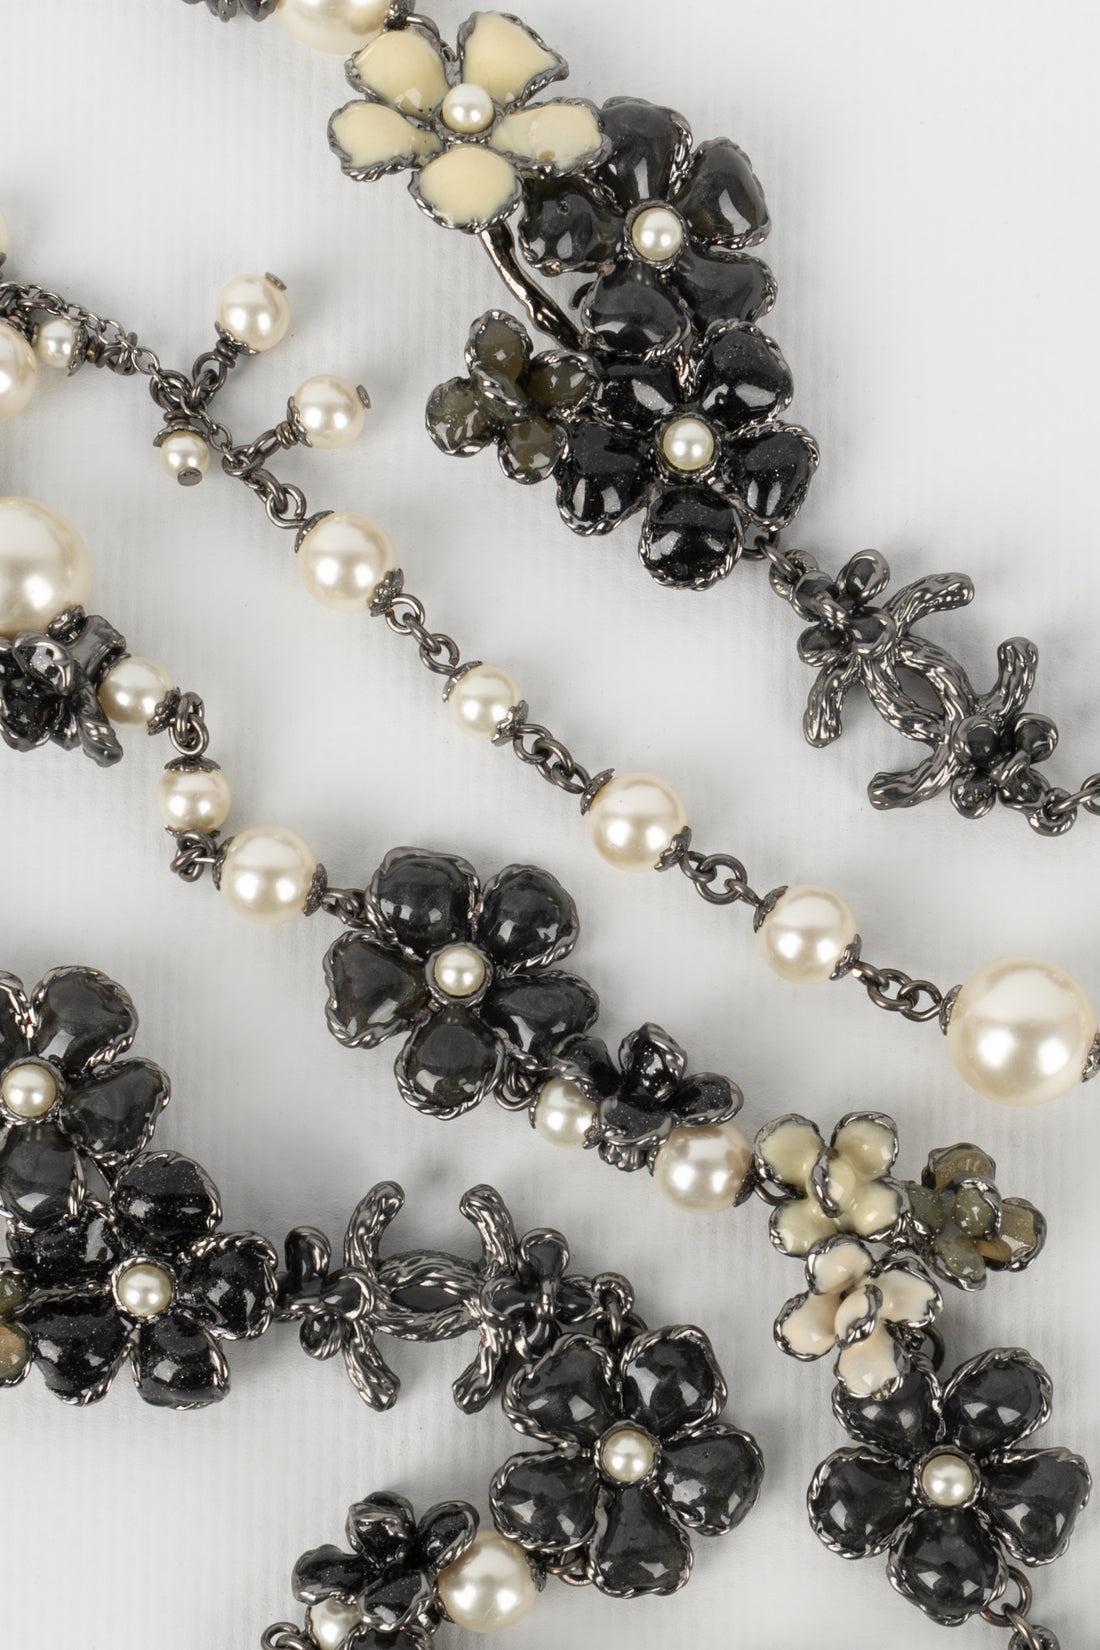 Chanel Silvery Metal Flower Necklace with Costume Pearls and Resin, 2012 For Sale 1